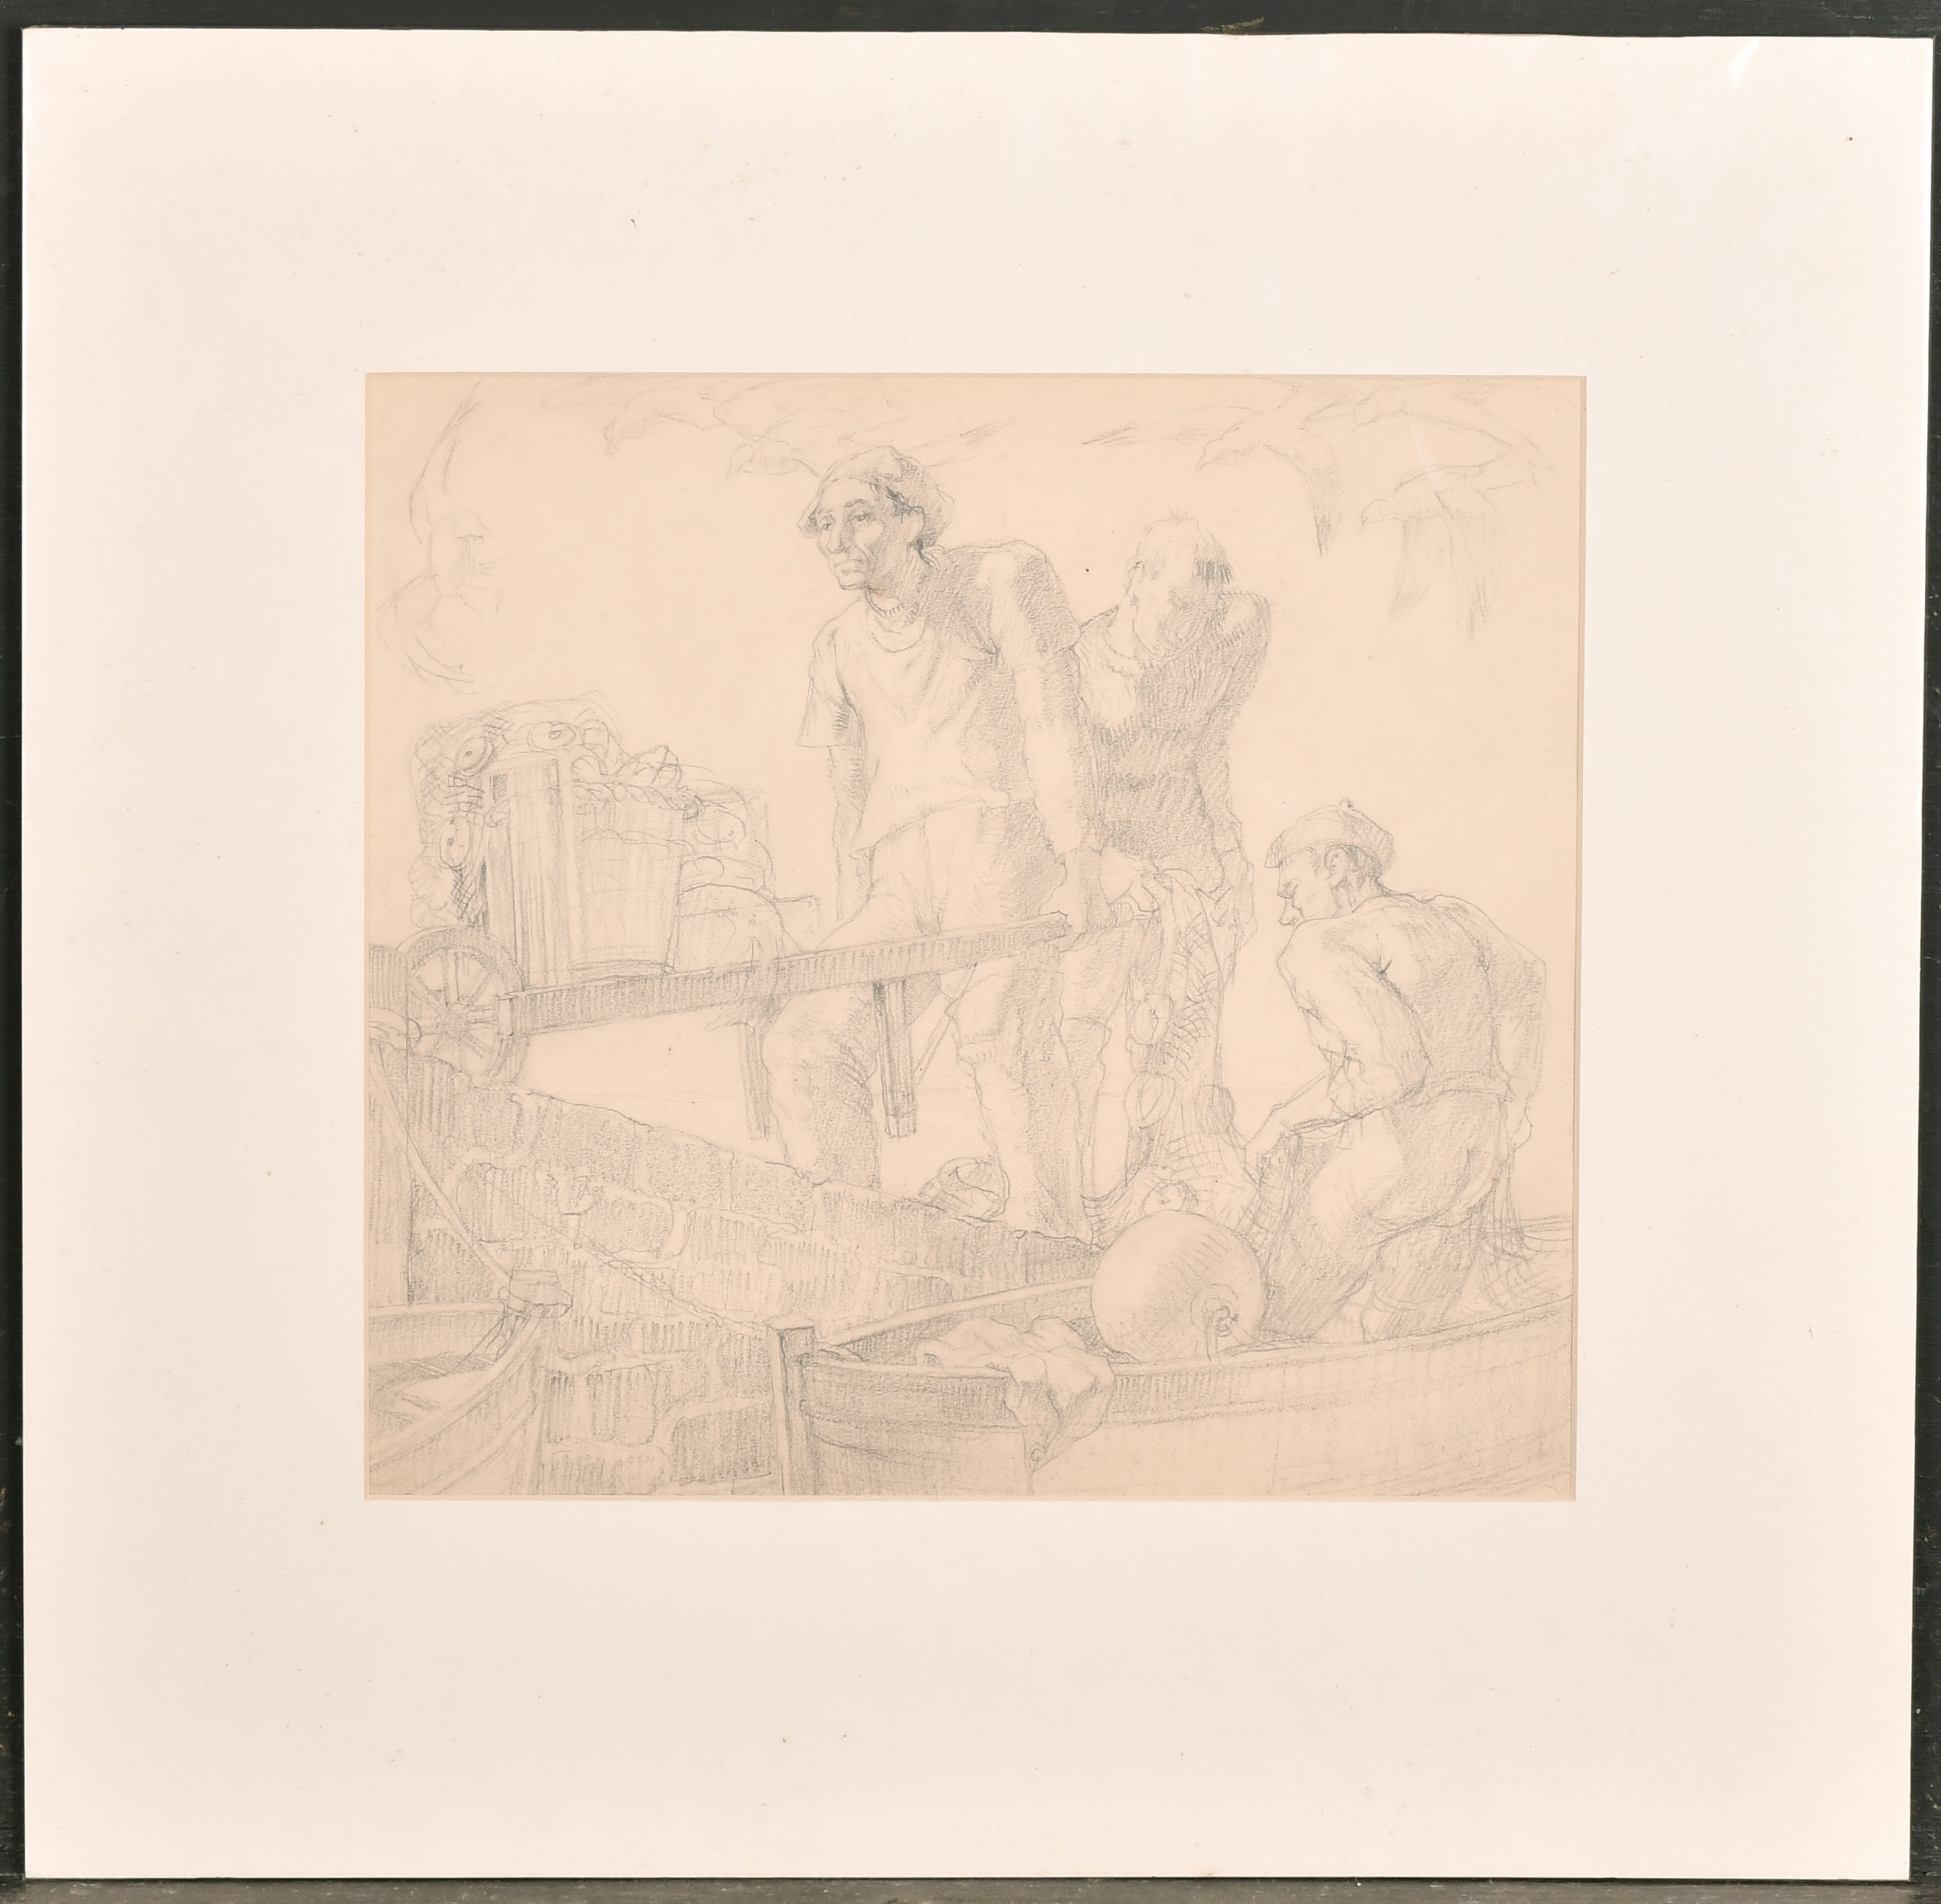 Harold Dearden (1882-1962) British. Study of Farm Workers, Pencil, mounted unframed 11" x 12" (27. - Image 4 of 5